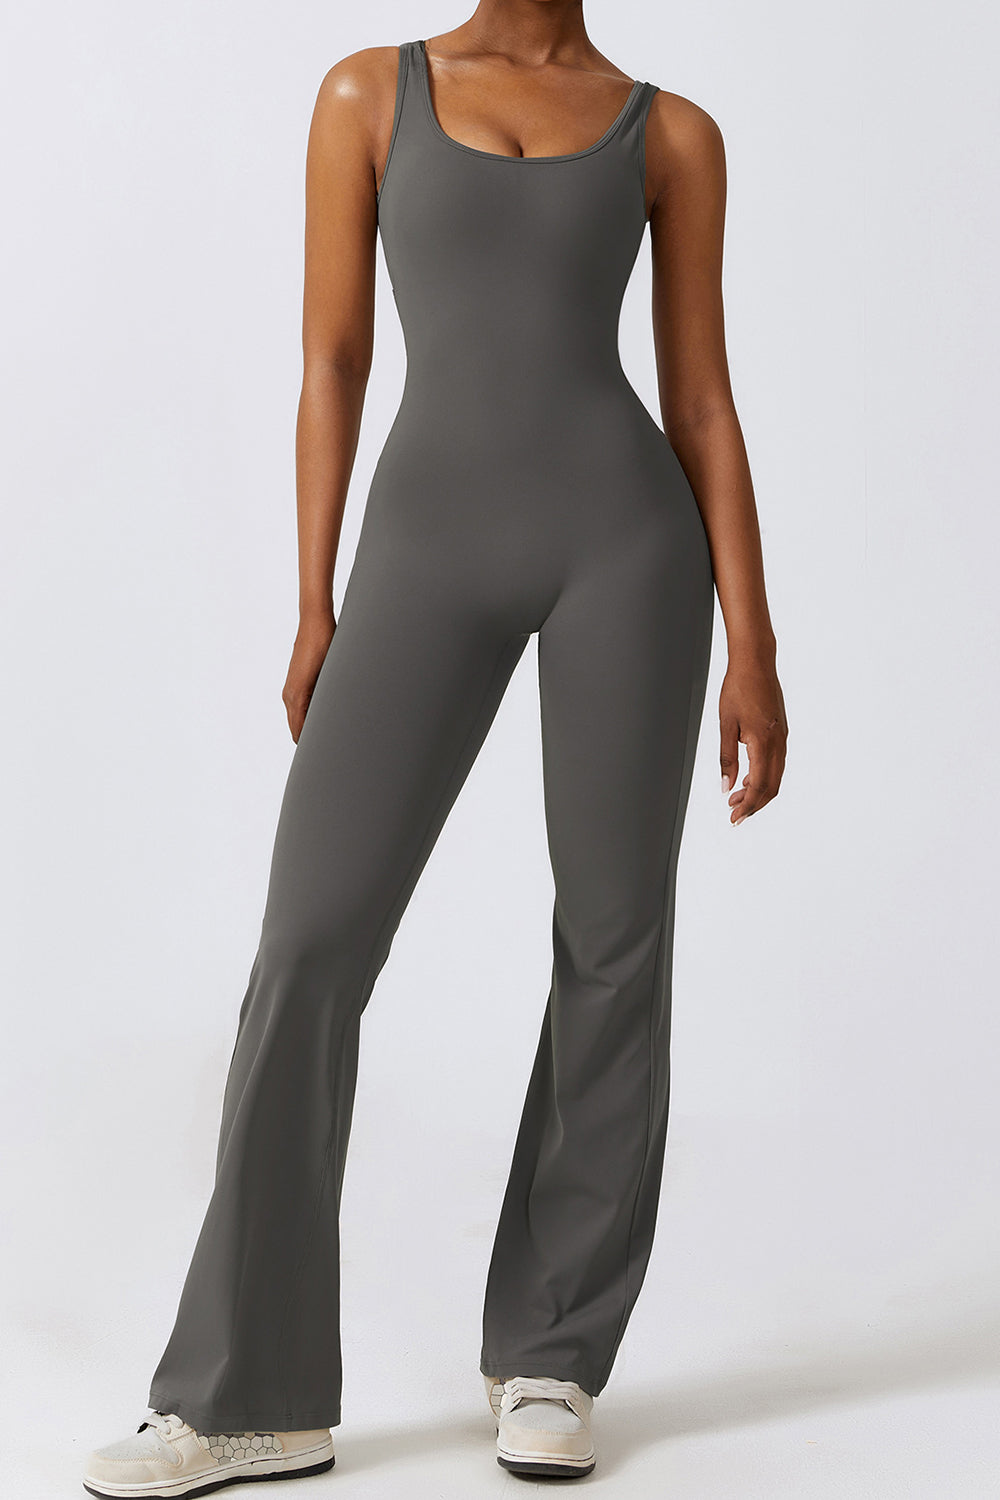 Sunset and Swim  Cutout Ruched Bootcut Sleeveless Active Jumpsuit  Sunset and Swim Charcoal S 